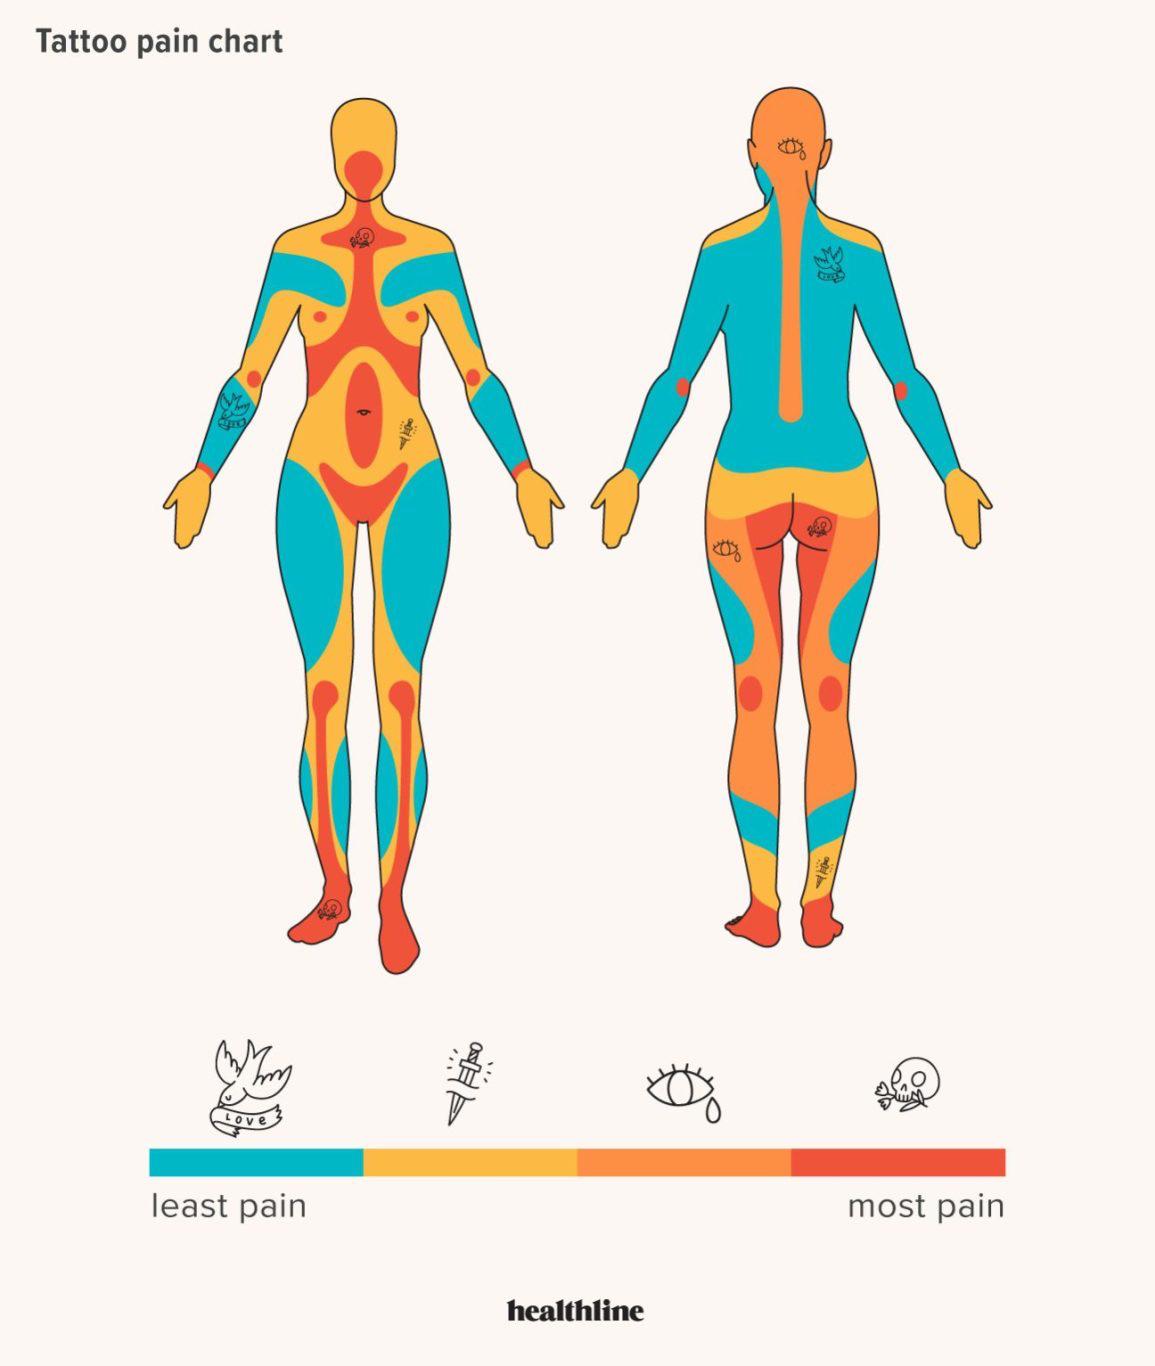 Weird facts and charts about the human body